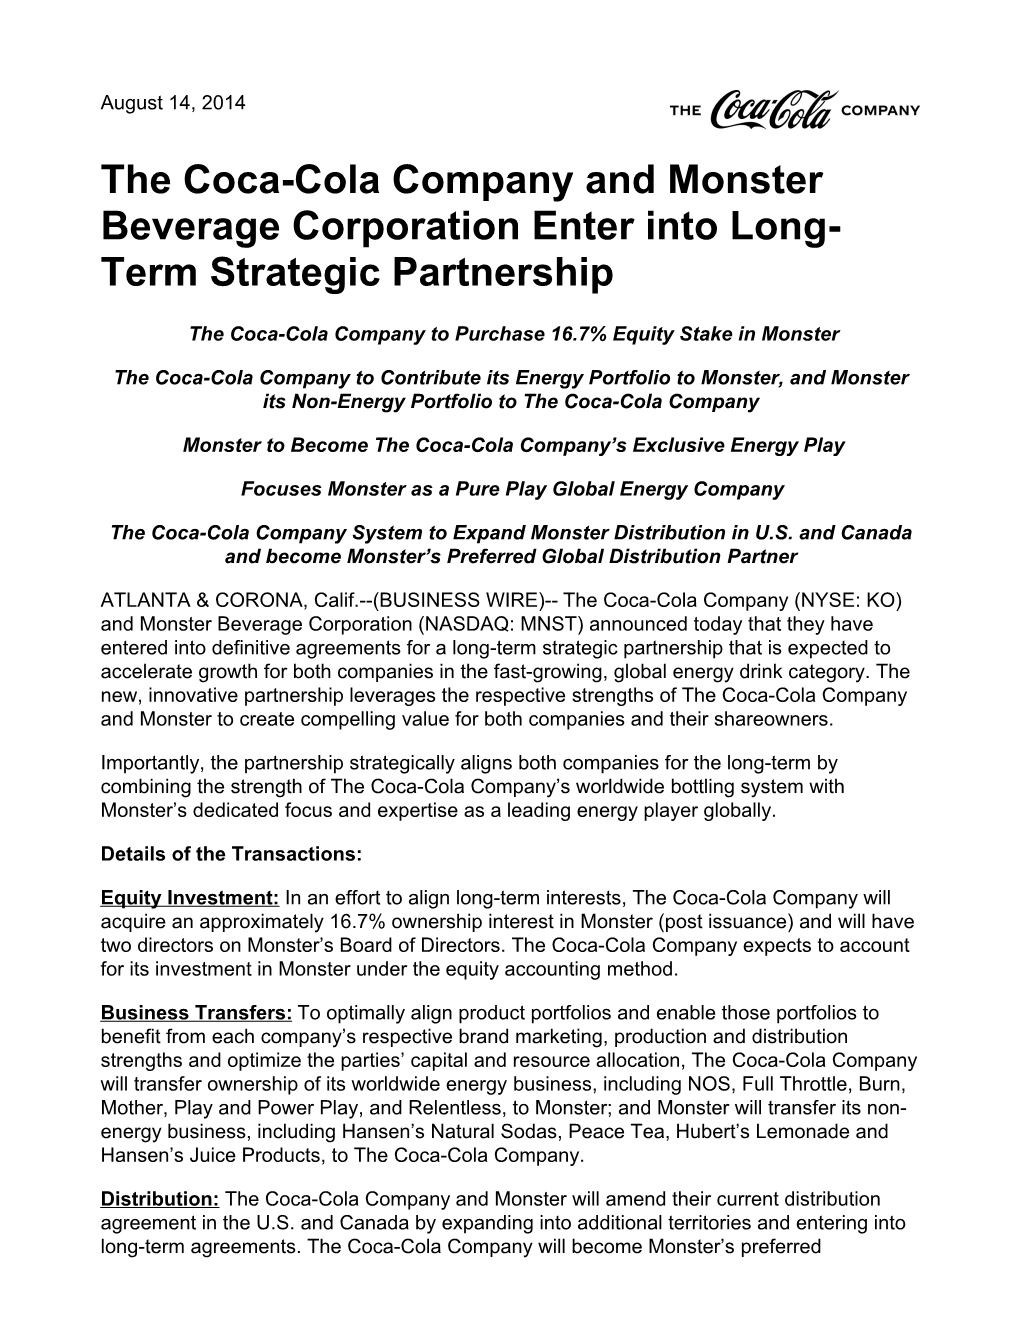 The Coca-Cola Company and Monster Beverage Corporation Enter Into Long- Term Strategic Partnership